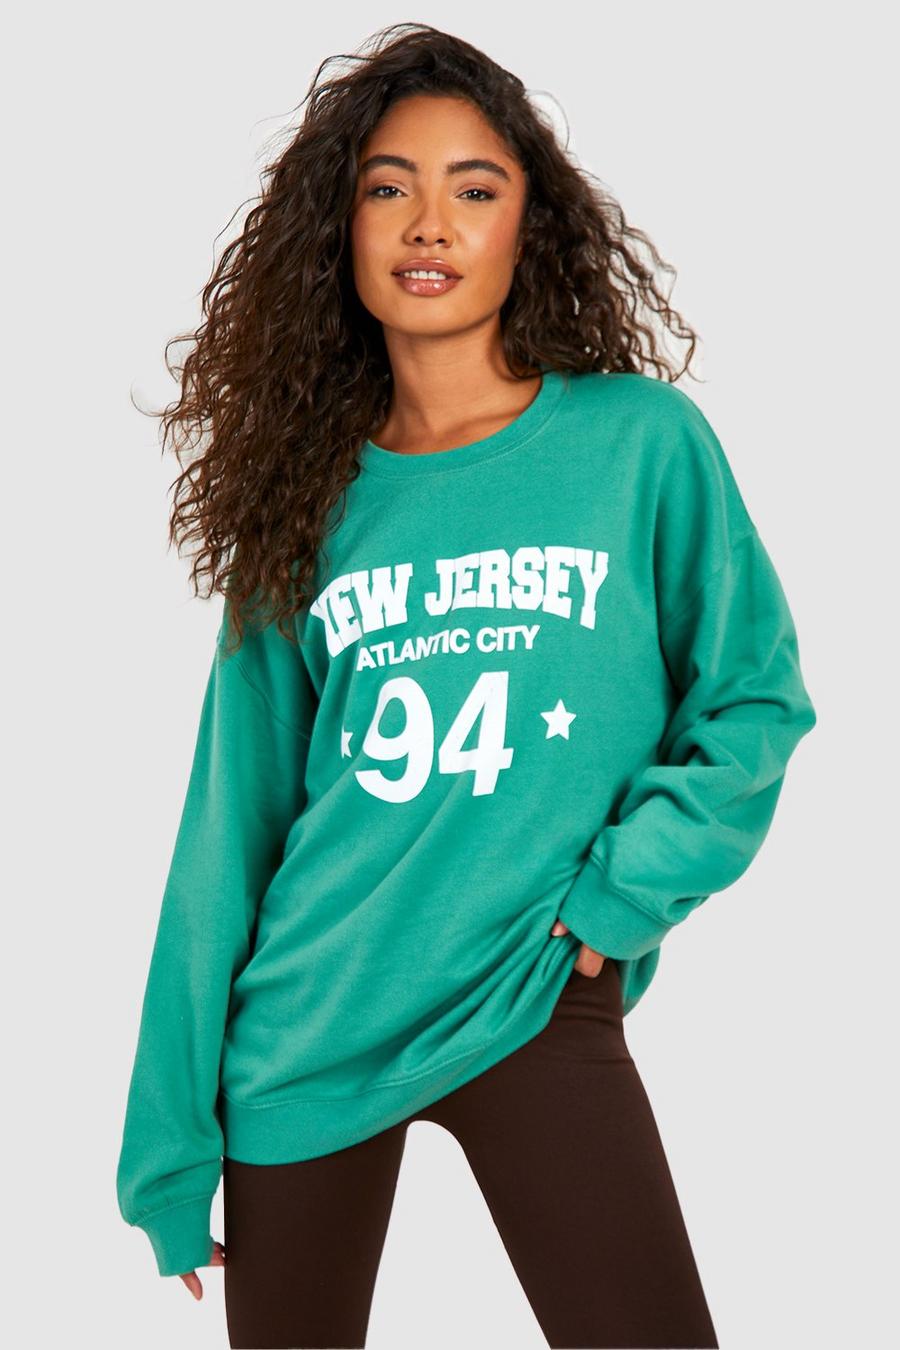 Forest green Tall New Jersey 94 Printed Sweatshirt